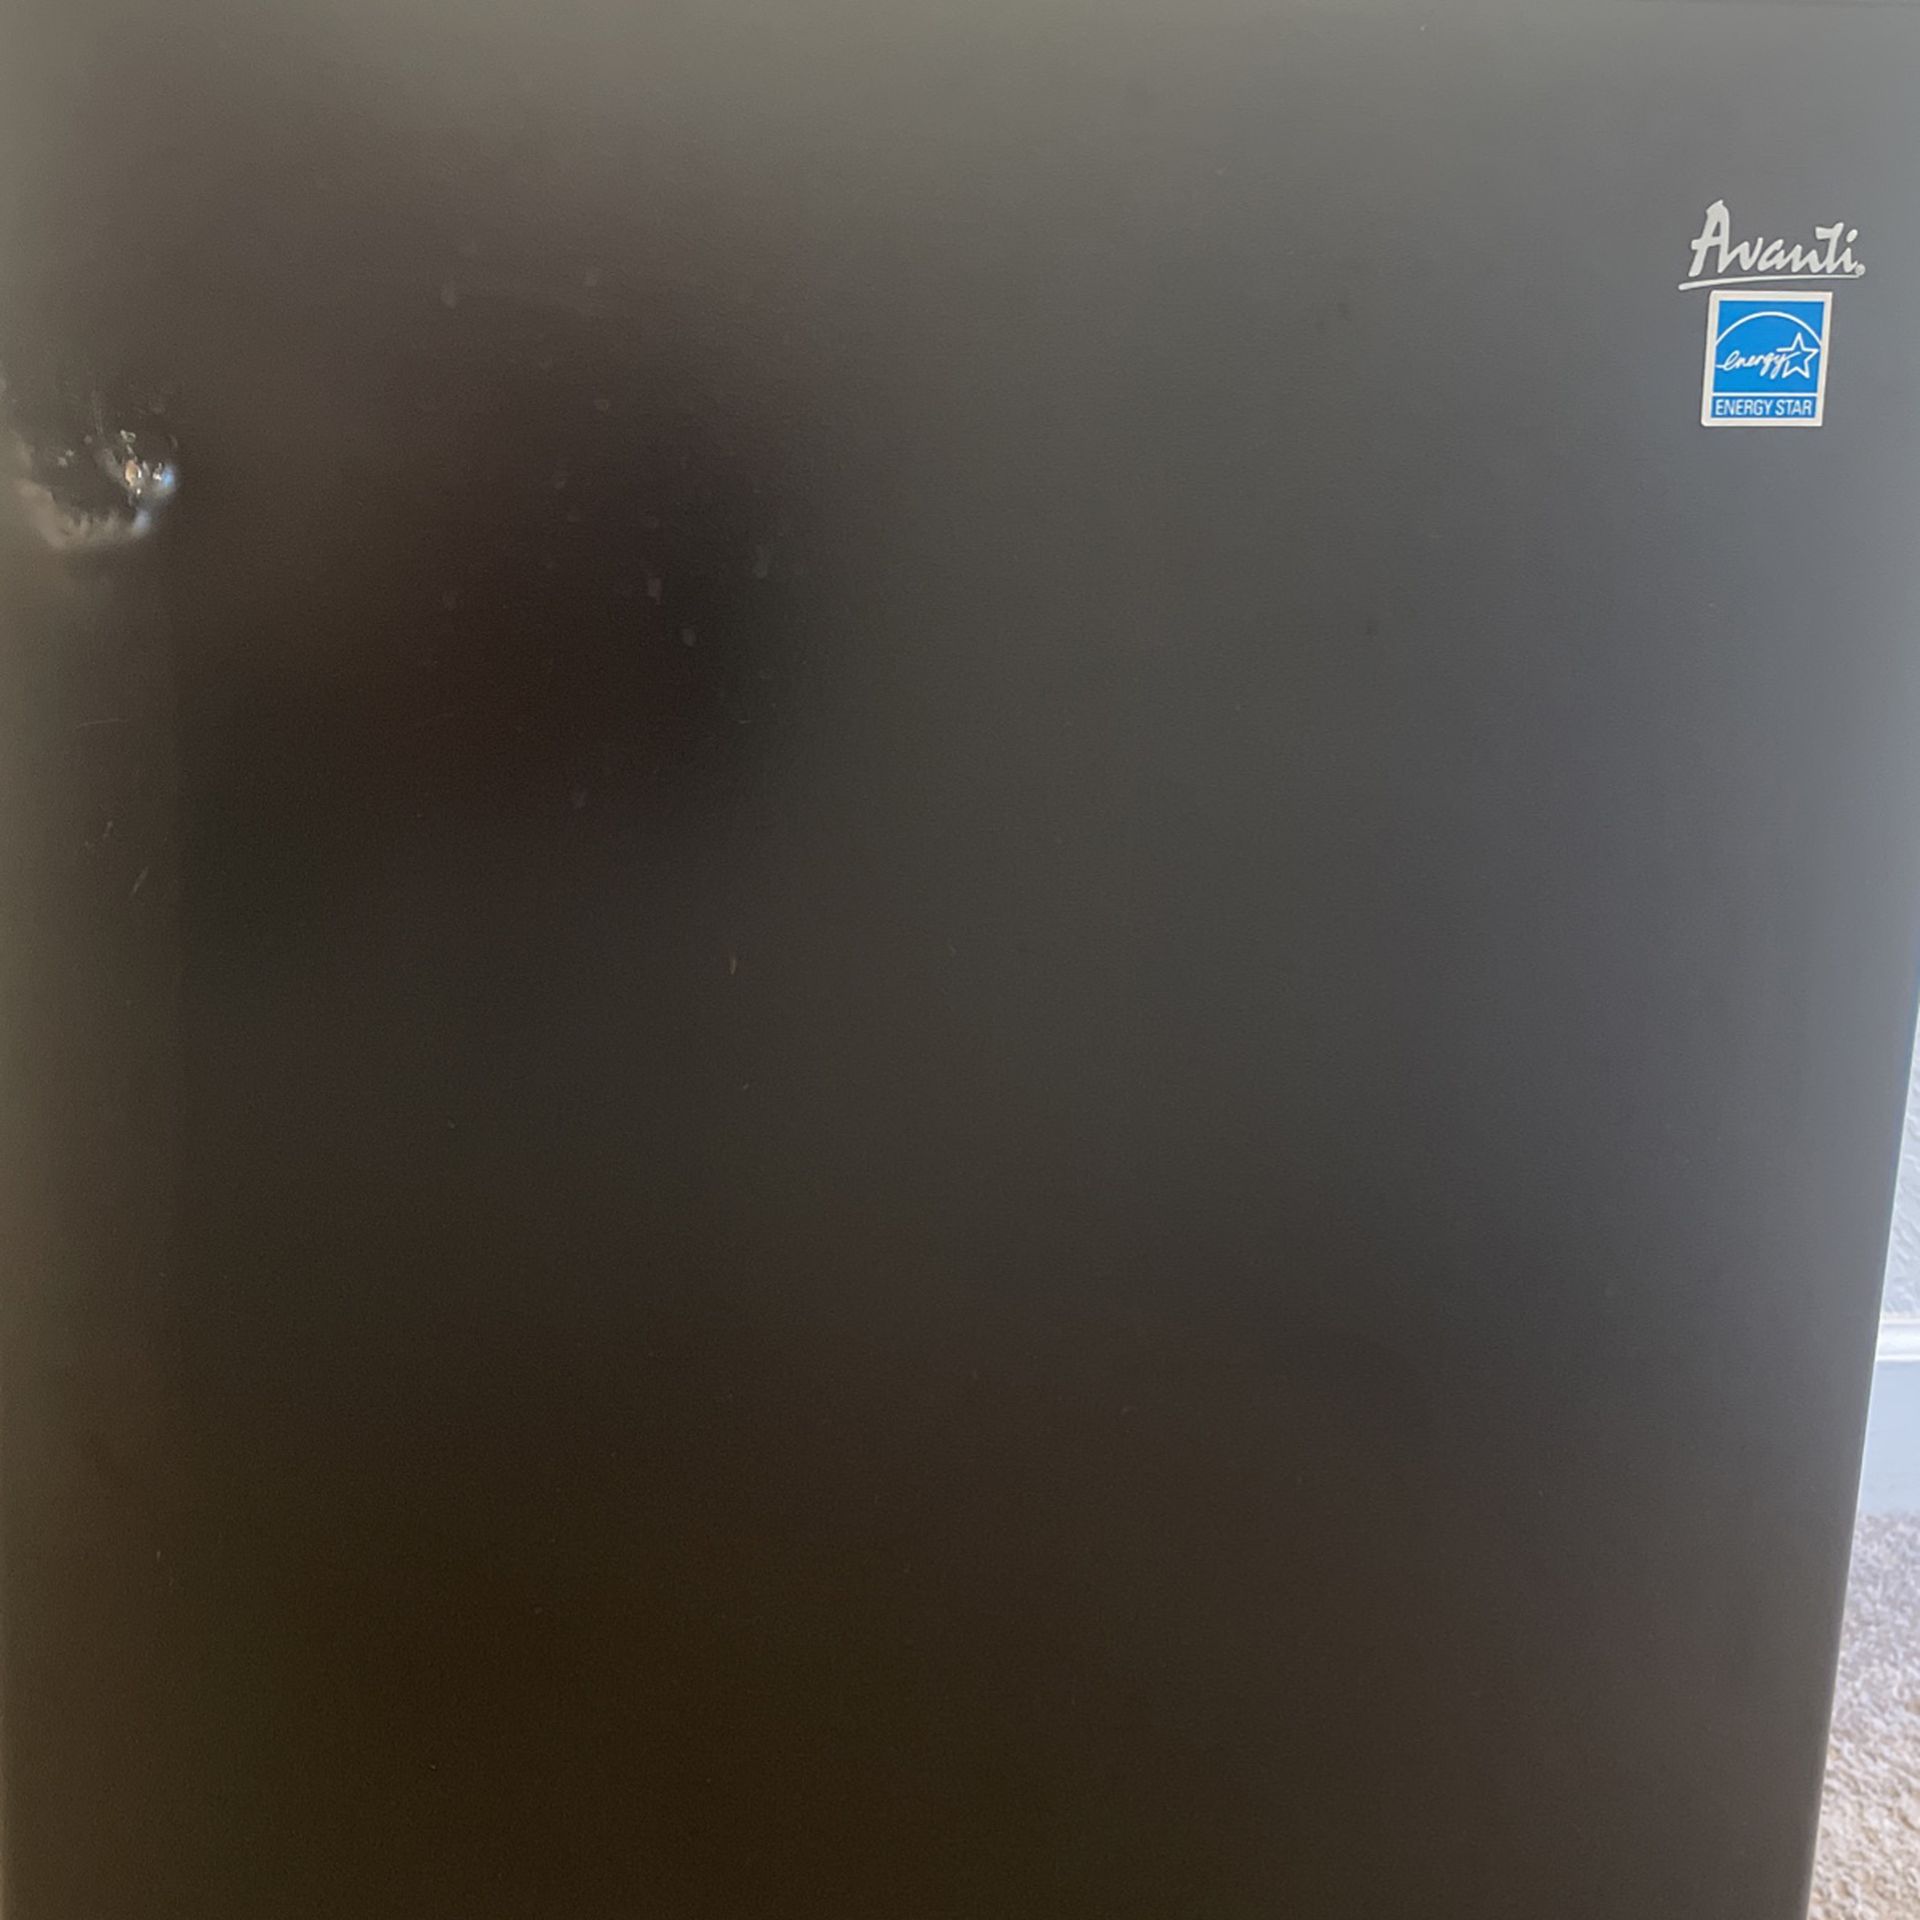 Small Refrigerator With Compact Freezer Space for Sale in Miami, FL -  OfferUp